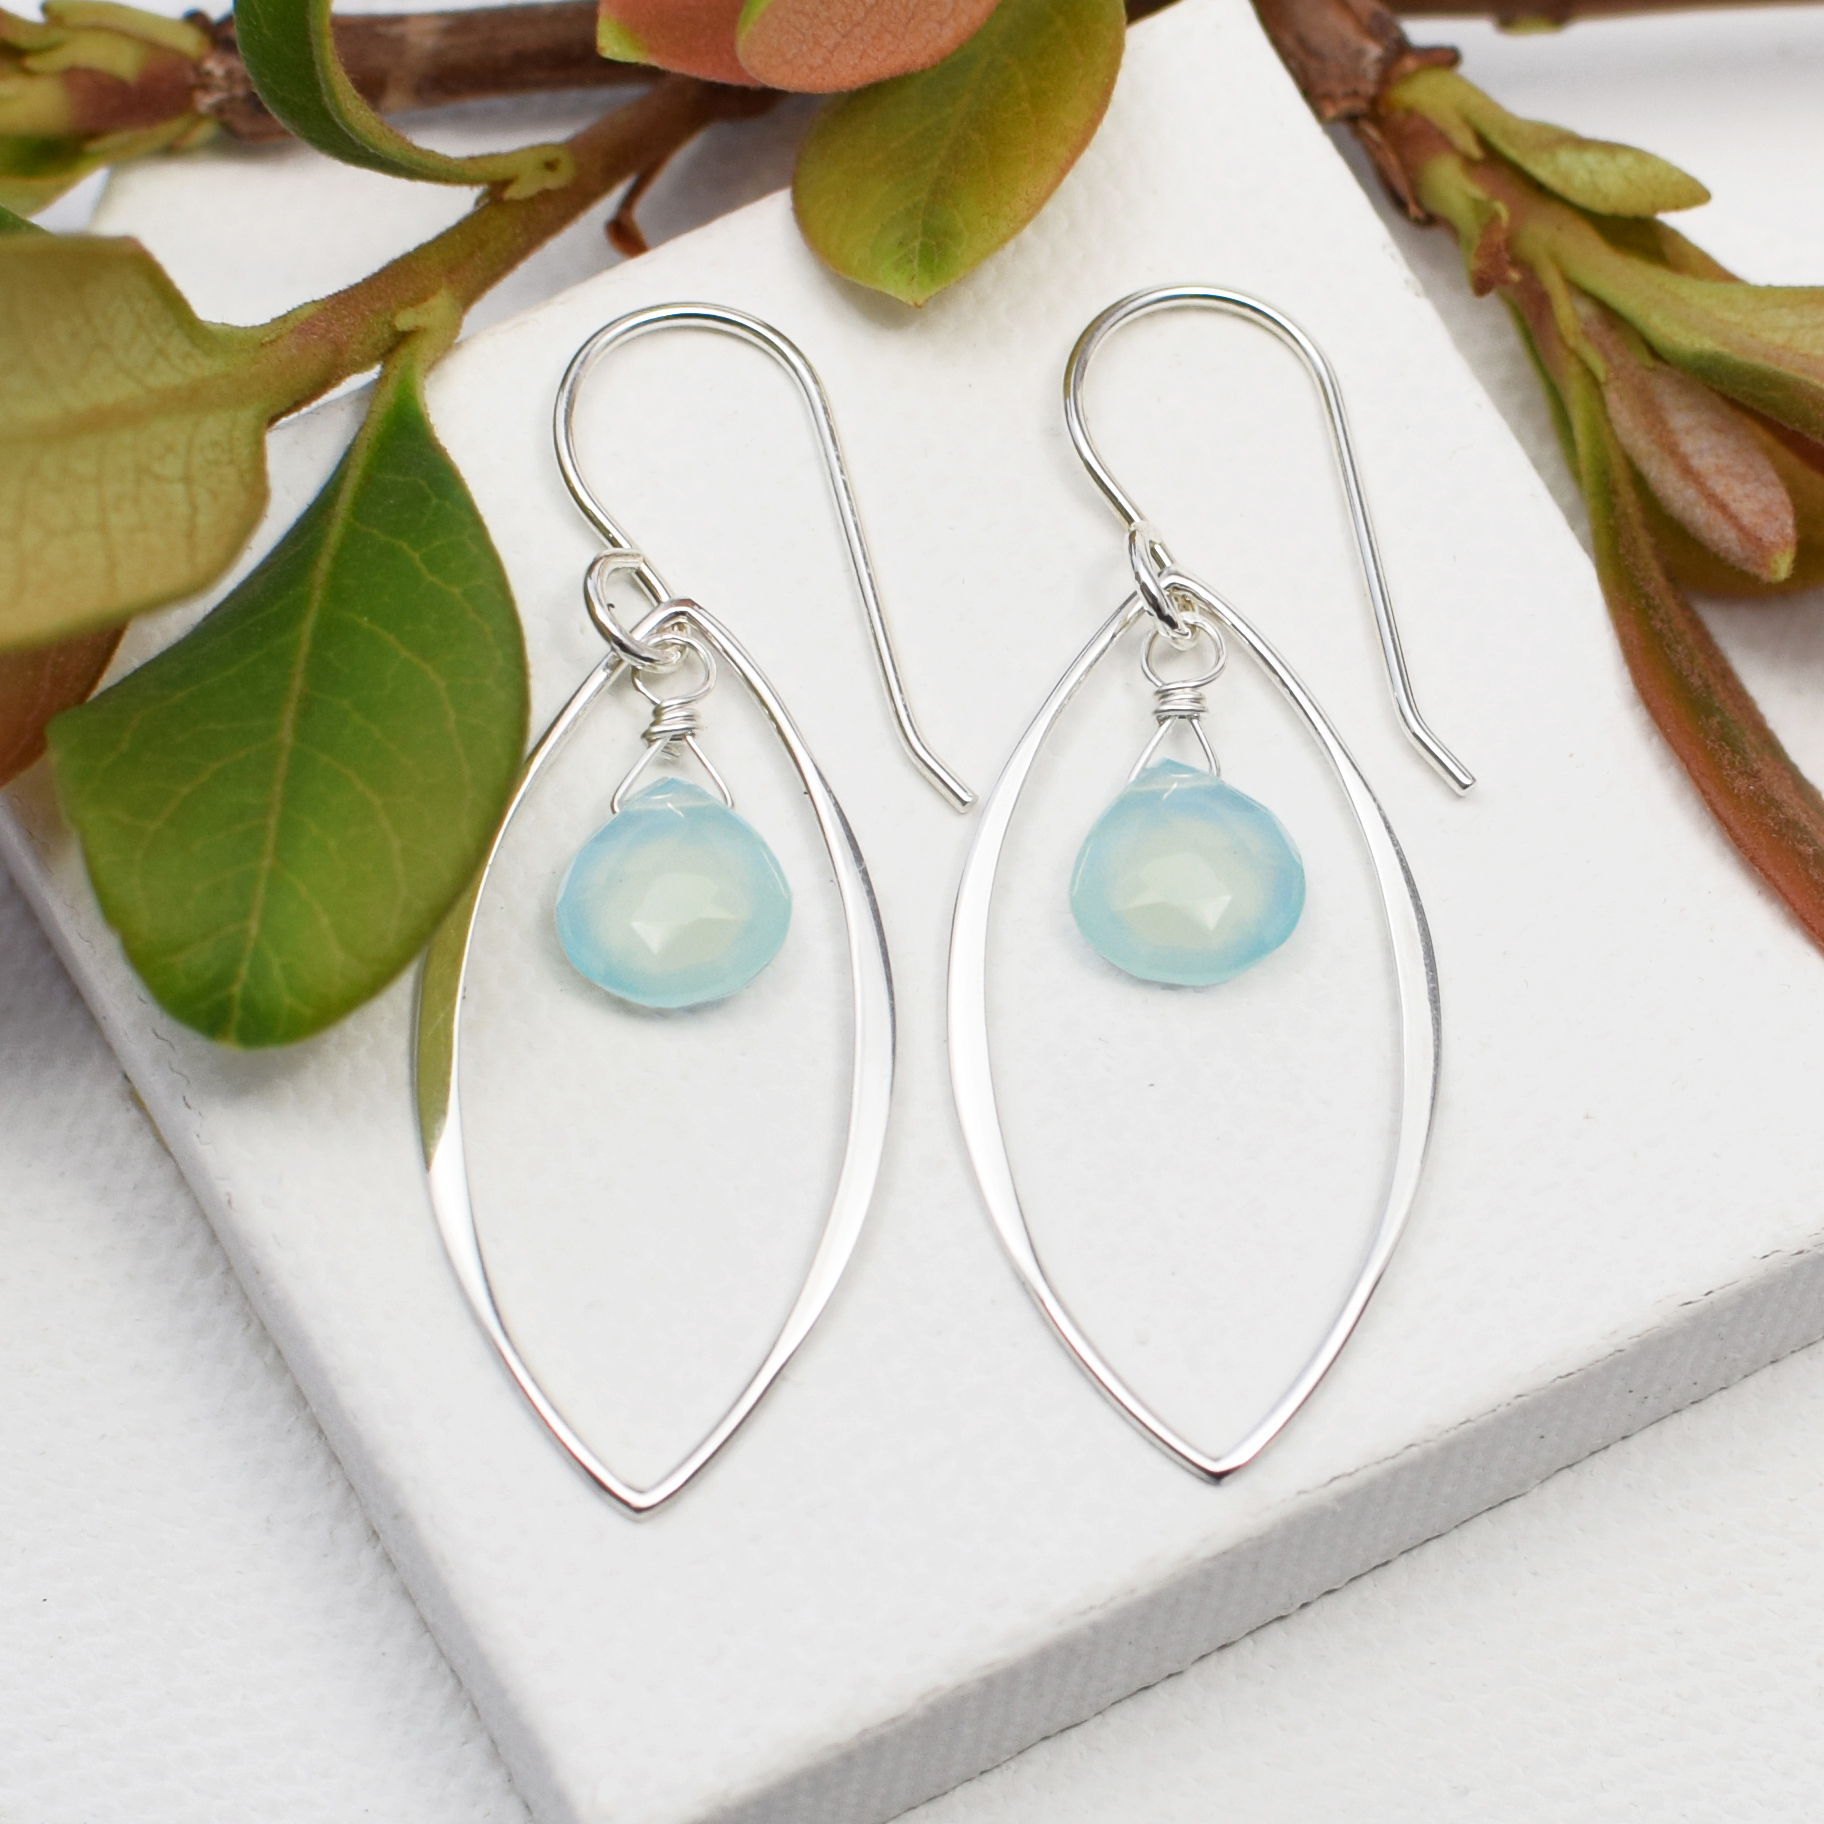 Large Leaf Earrings with Gemstones | Lila Clare Jewelry